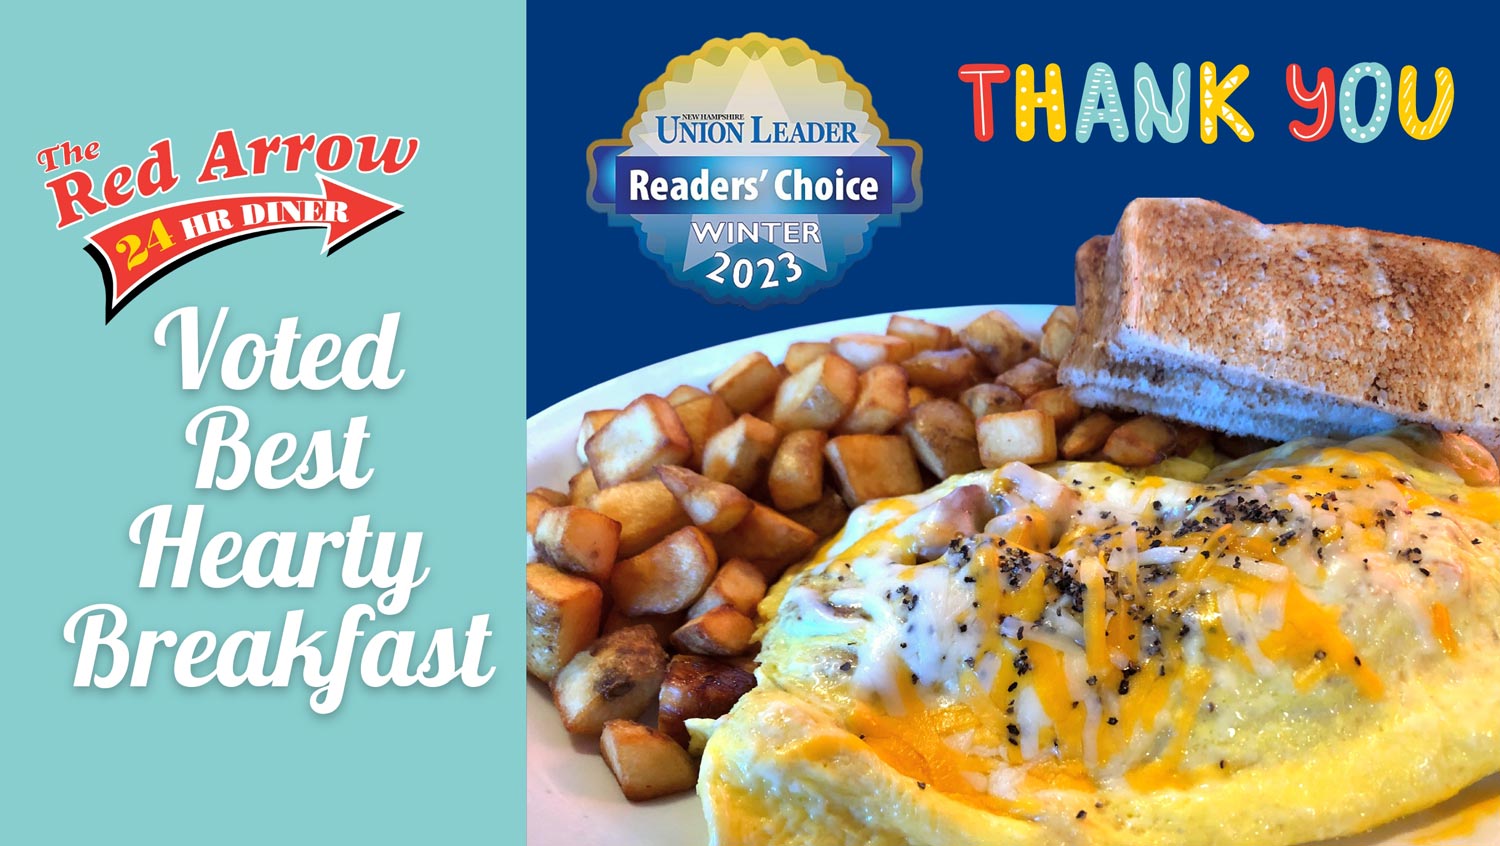 Red Arrow Diner Voted Best Hearty Breakfast in New Hampshire Union Leader 2023 Winter Readers’ Choice Awards